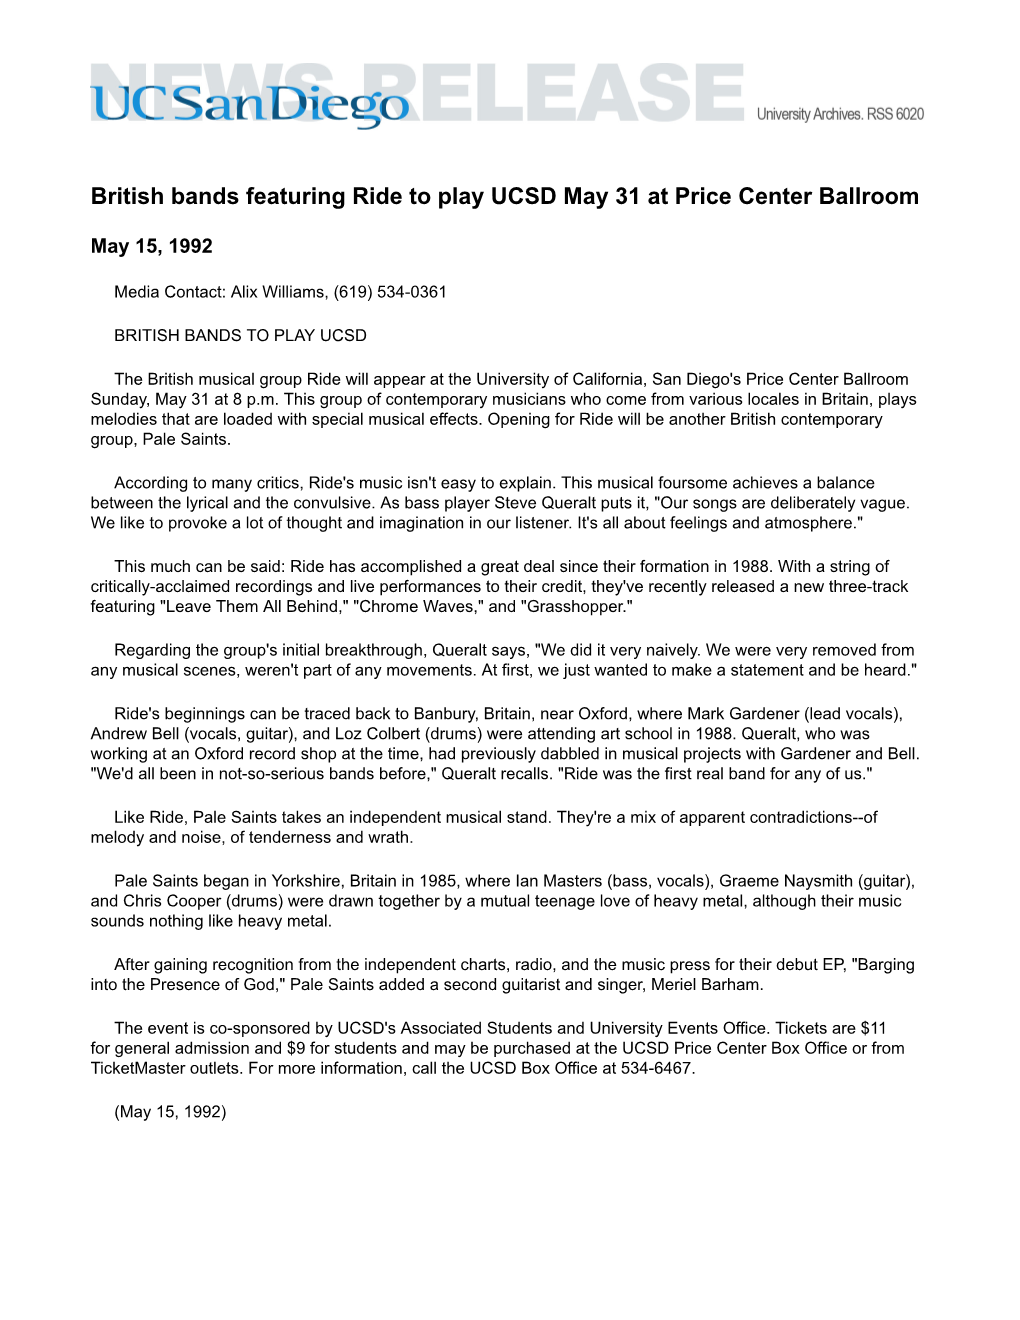 British Bands Featuring Ride to Play UCSD May 31 at Price Center Ballroom